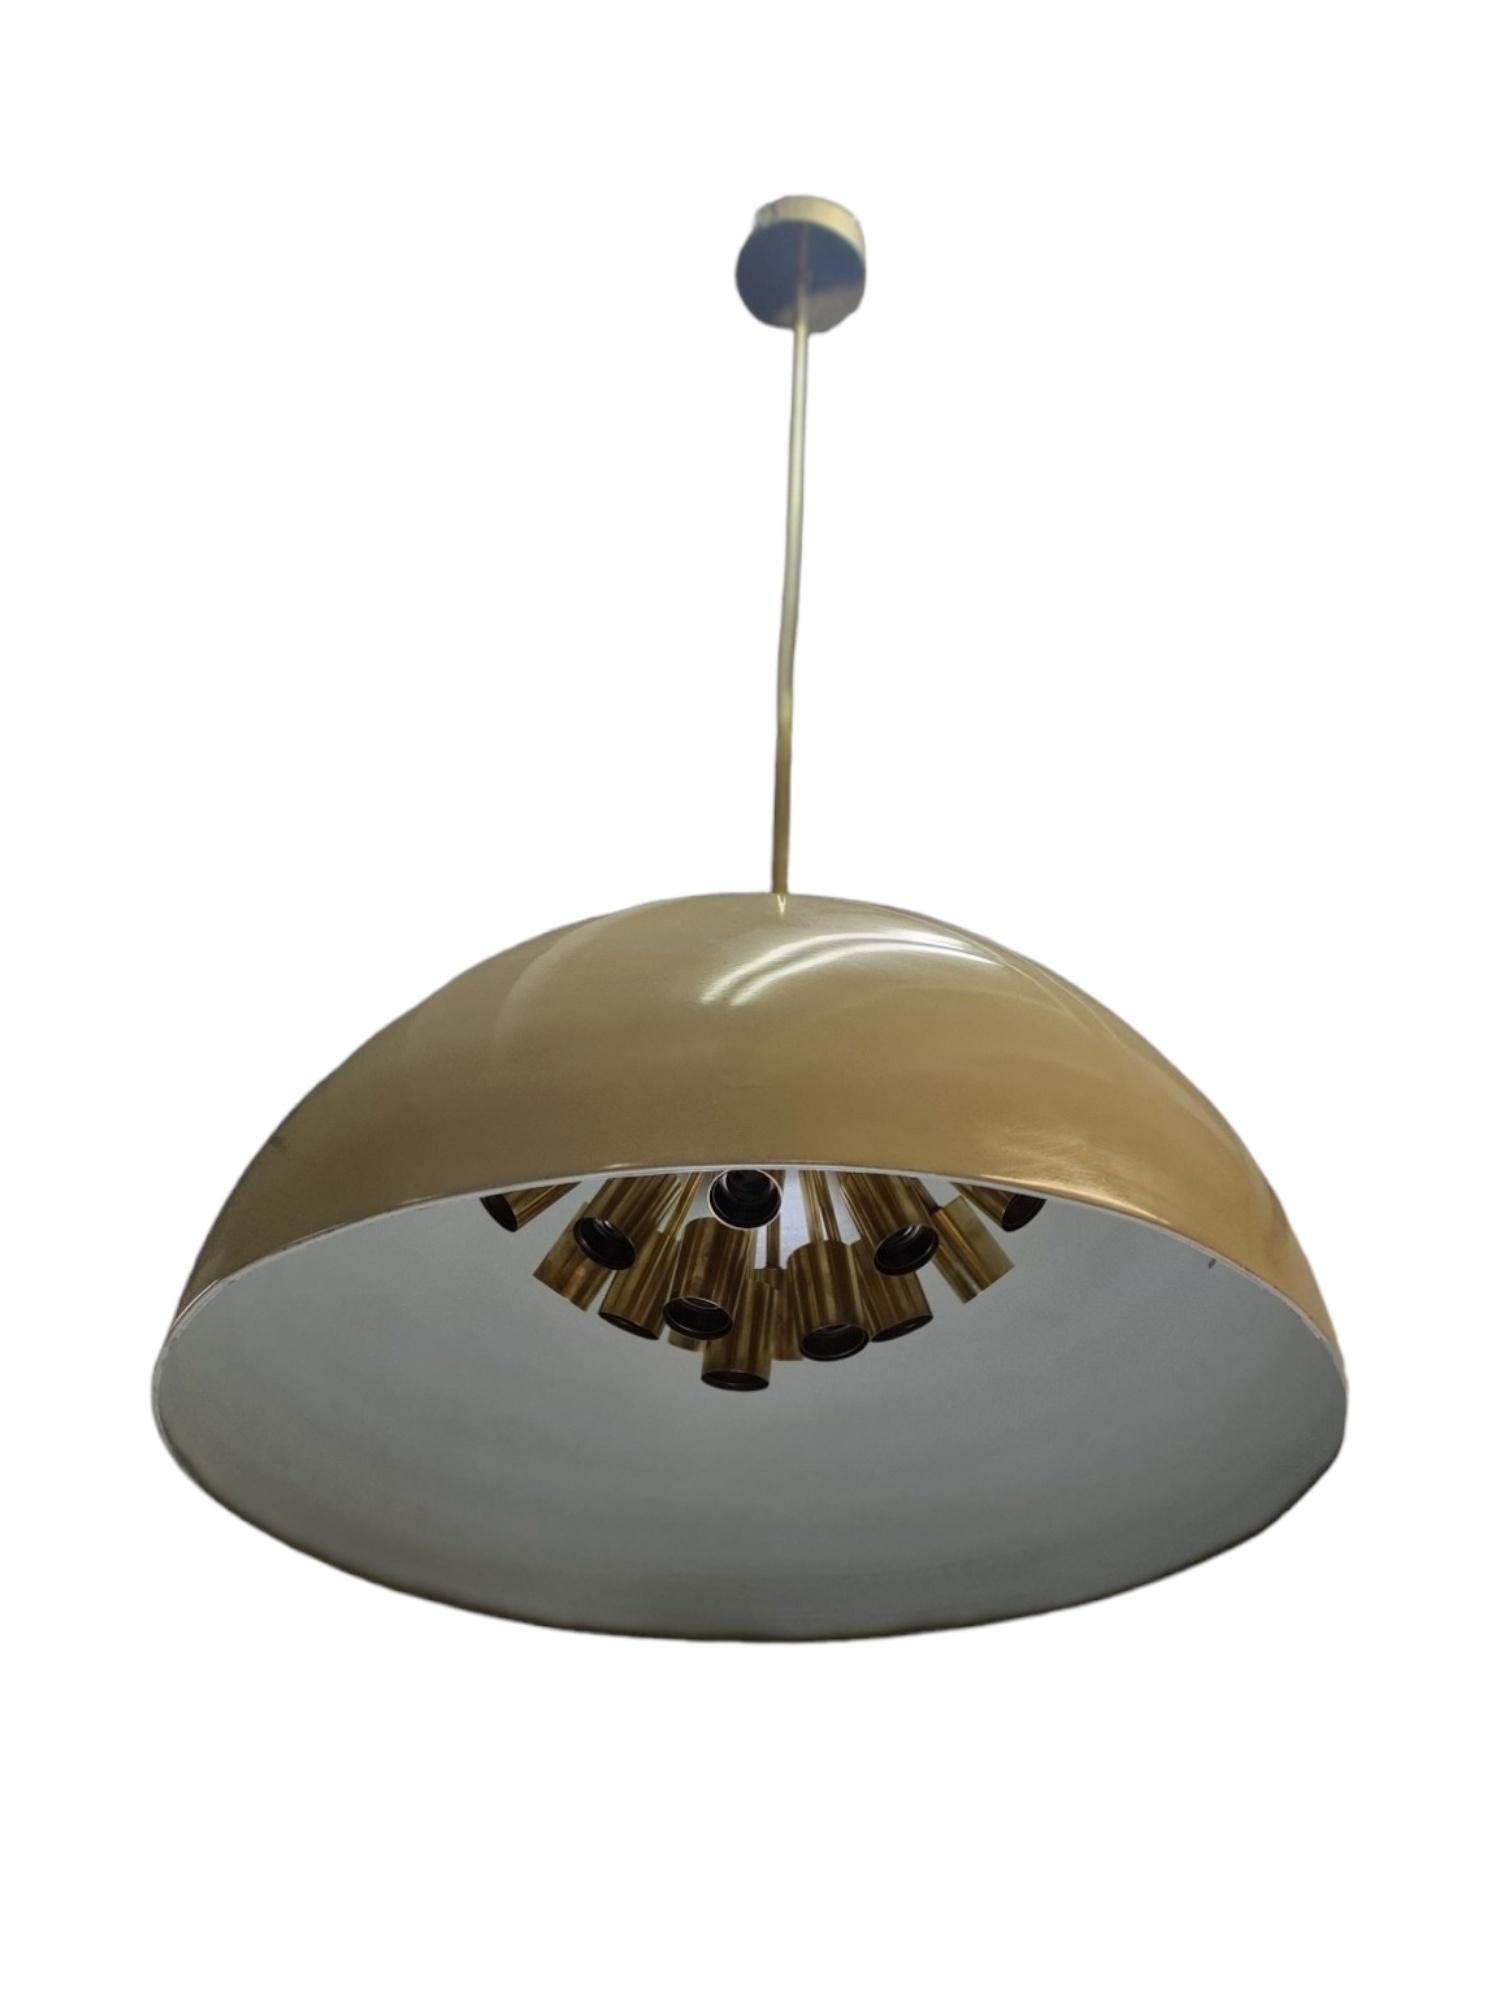 Finnish Paavo Tynell Aulanko Hotel Ceiling Lamp For Sale